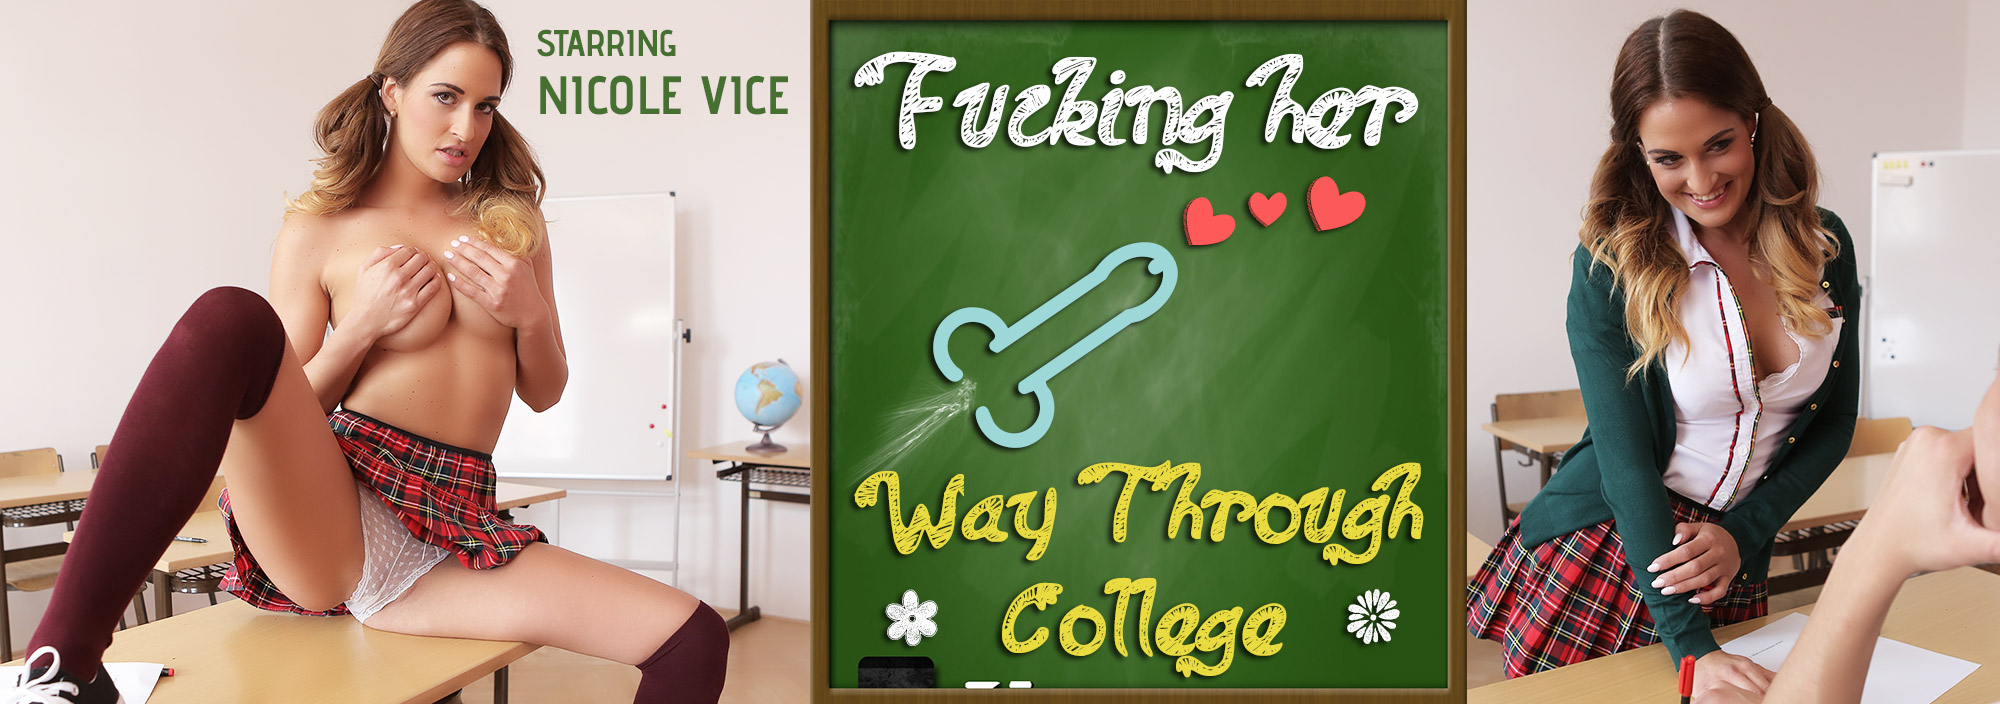 F**ing her way through college - VR Porn Video, Starring: Nicole Vice